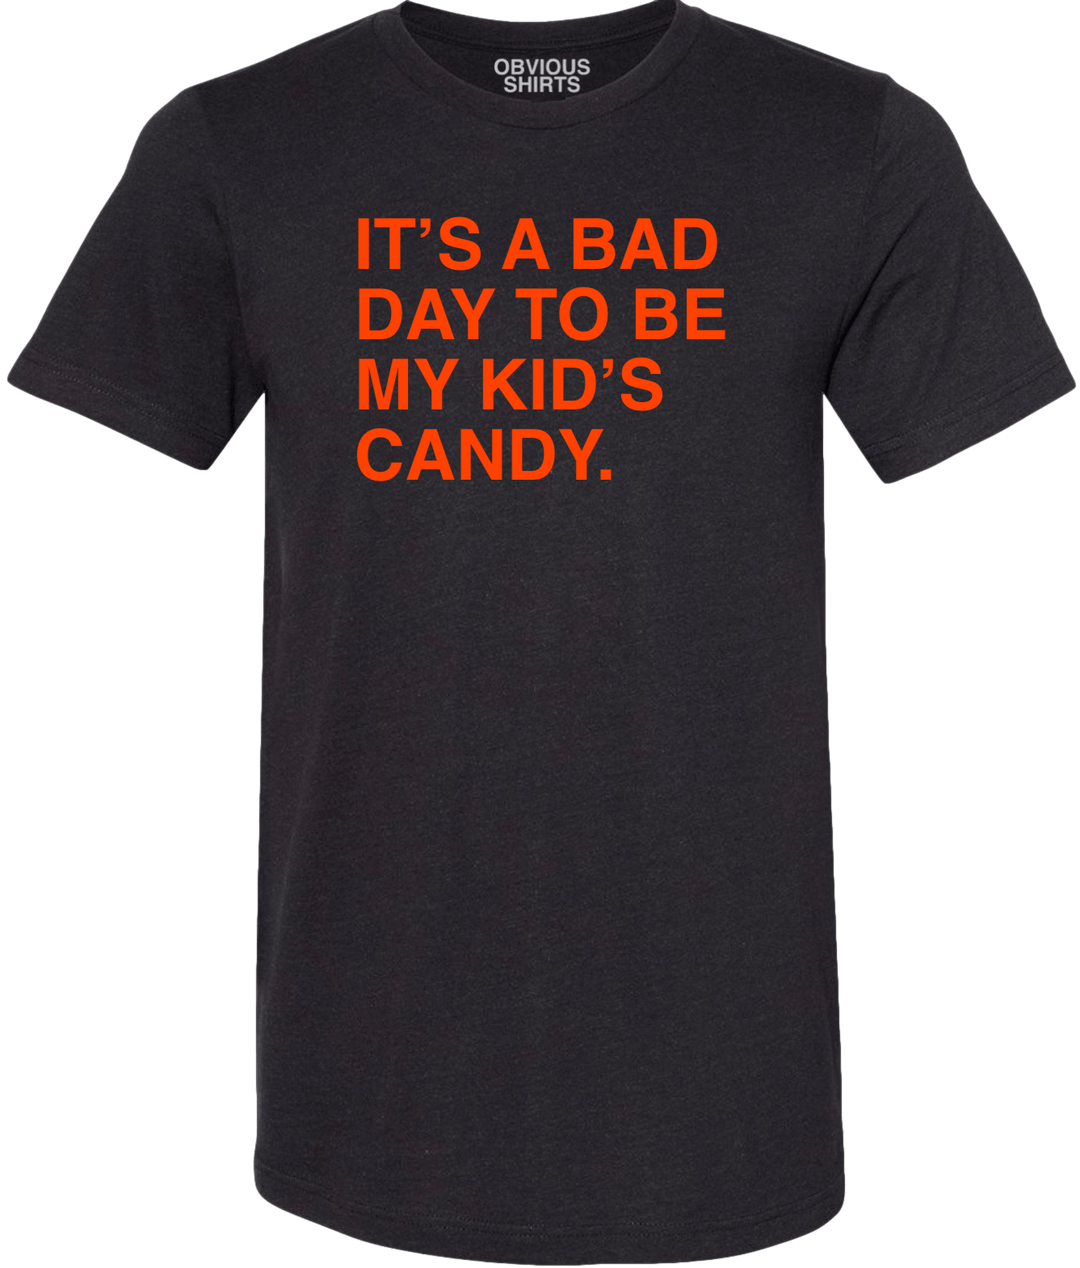 IT'S A BAD DAY TO BE MY KID'S CANDY. - OBVIOUS SHIRTS